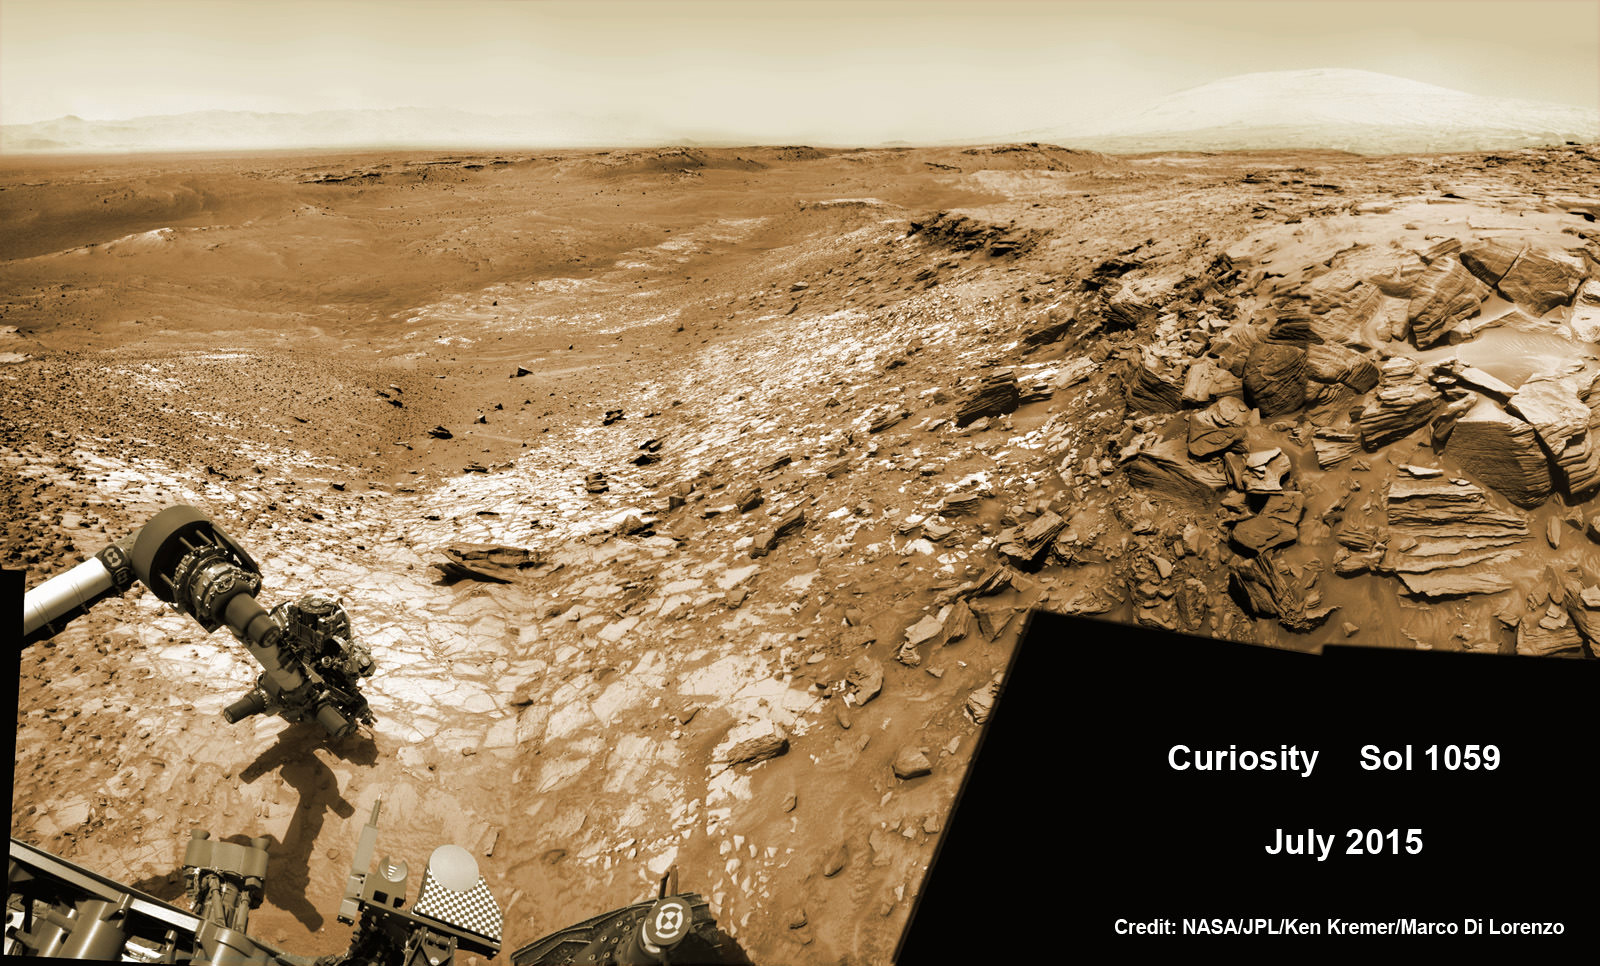 Curiosity extends robotic arm and conducts test drill at “Buckskin” rock target at bright toned “Lion” outcrop on the lower region of Mount Sharp on Mars, seen at right.   Gale Crater eroded rim seen in the distant background at left, in this composite multisol mosaic of navcam raw images taken to Sol 1059, July 30, 2015.  Navcam camera raw images stitched and colorized. Credit:  NASA/JPL-Caltech/Ken Kremer/kenkremer.com/Marco Di Lorenzo   